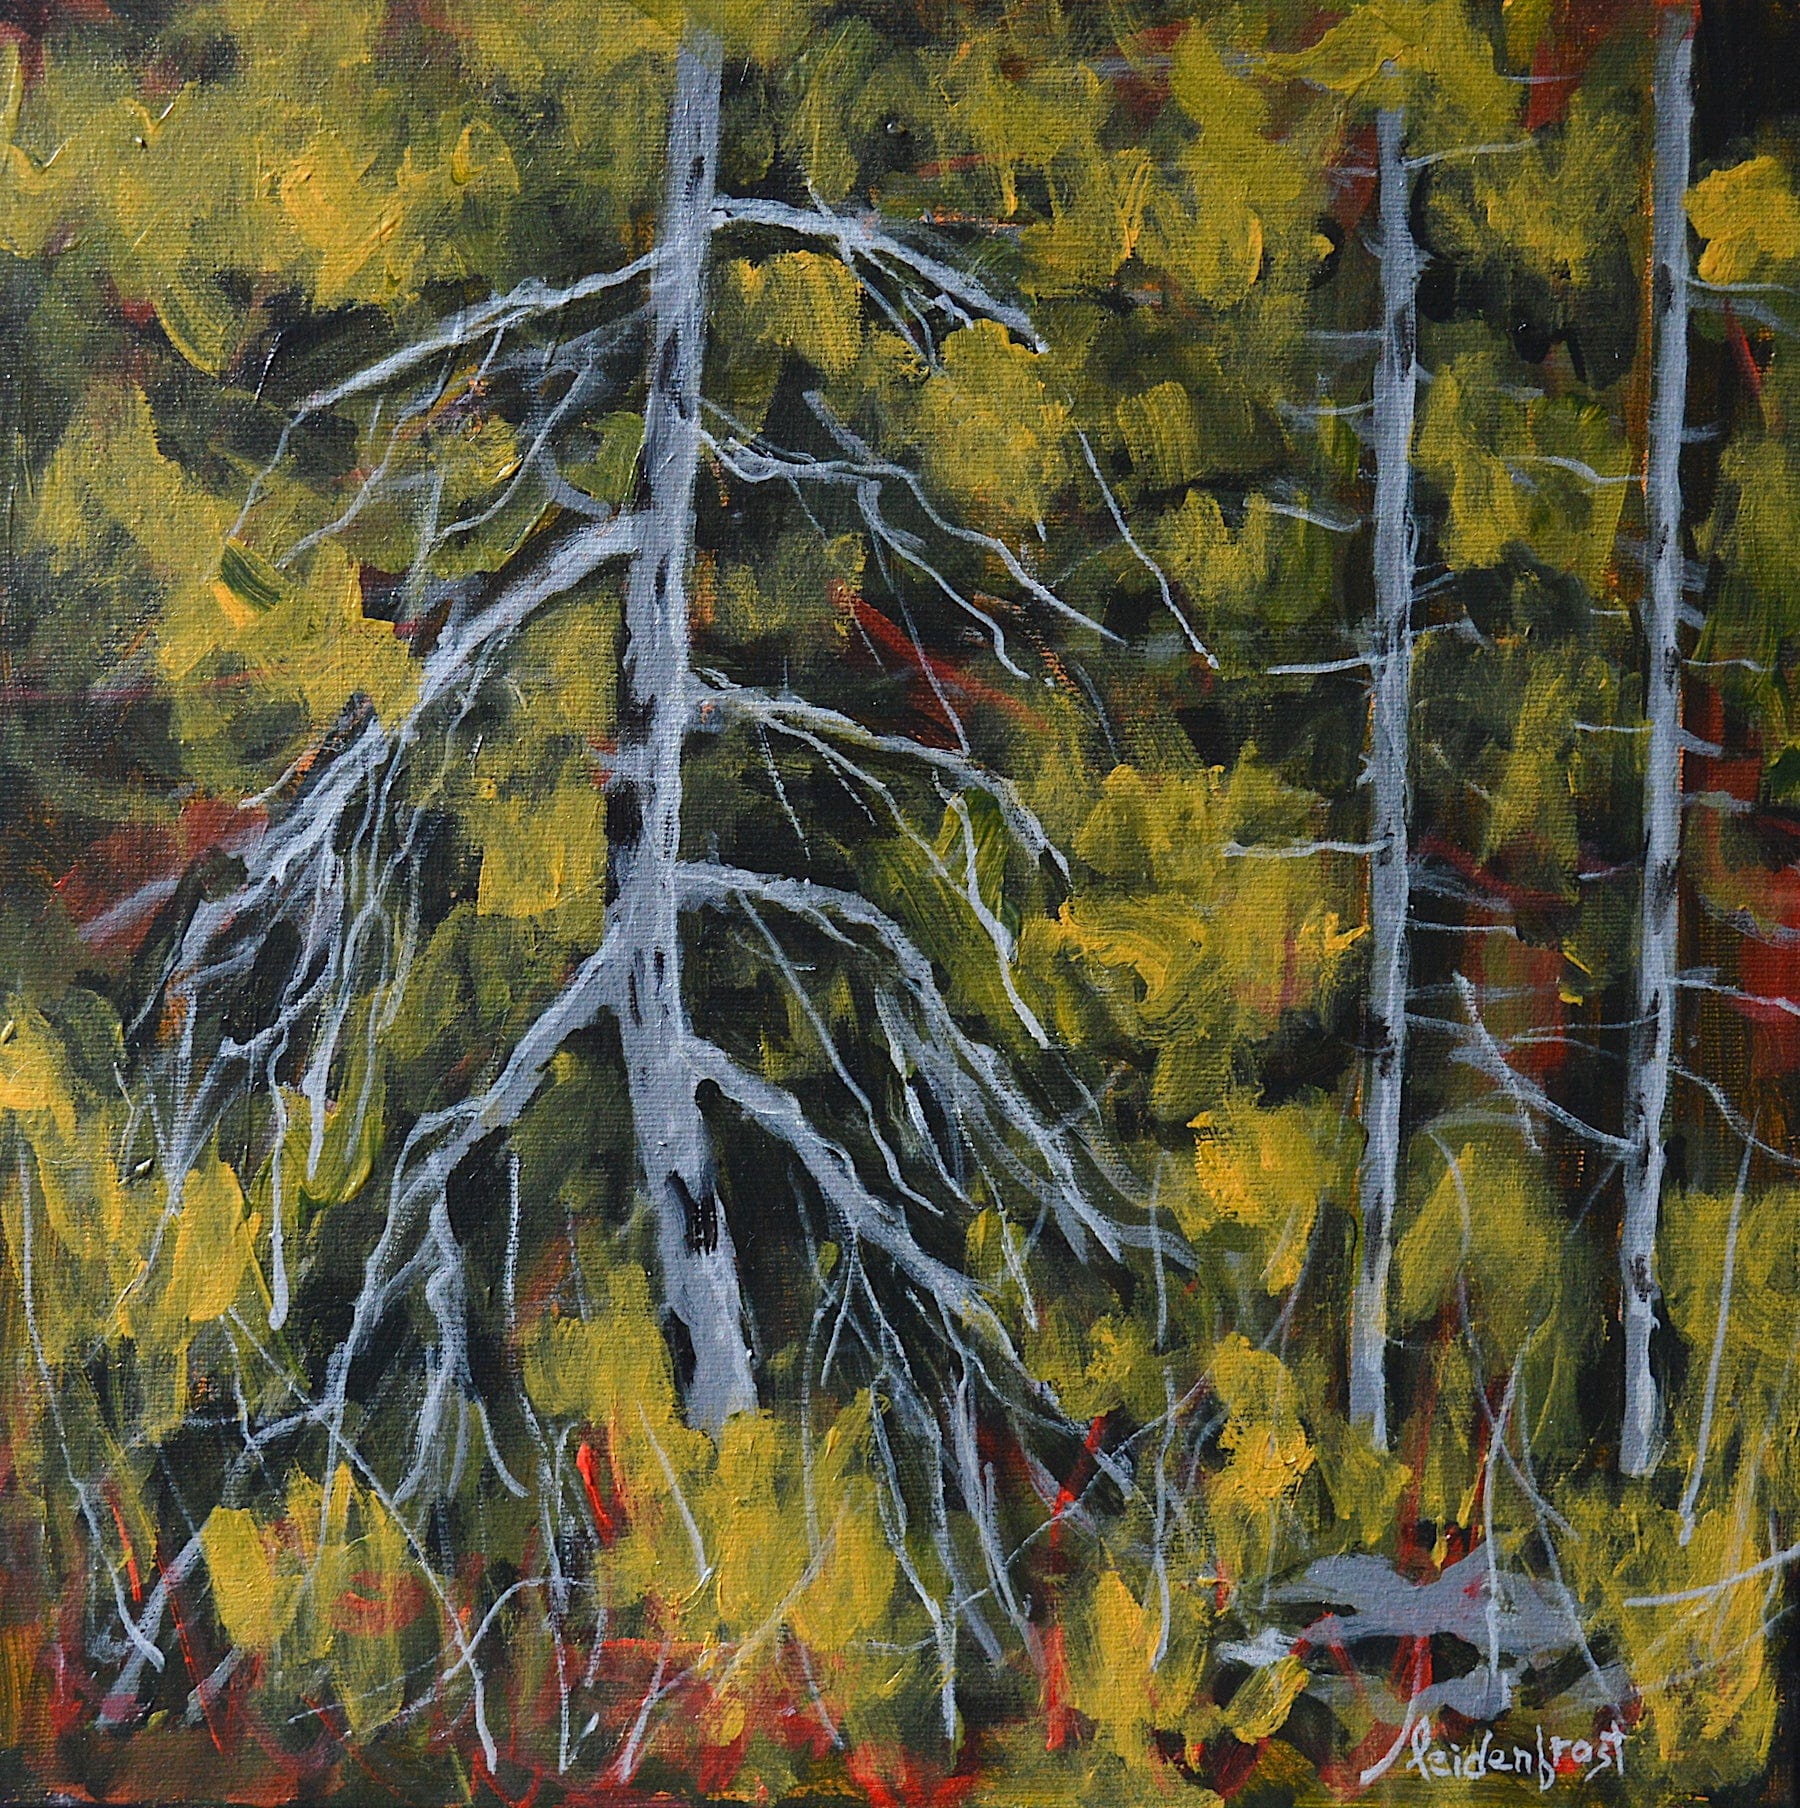 Wayne Leidenfrost painting Into the Forest Art Works Gallery